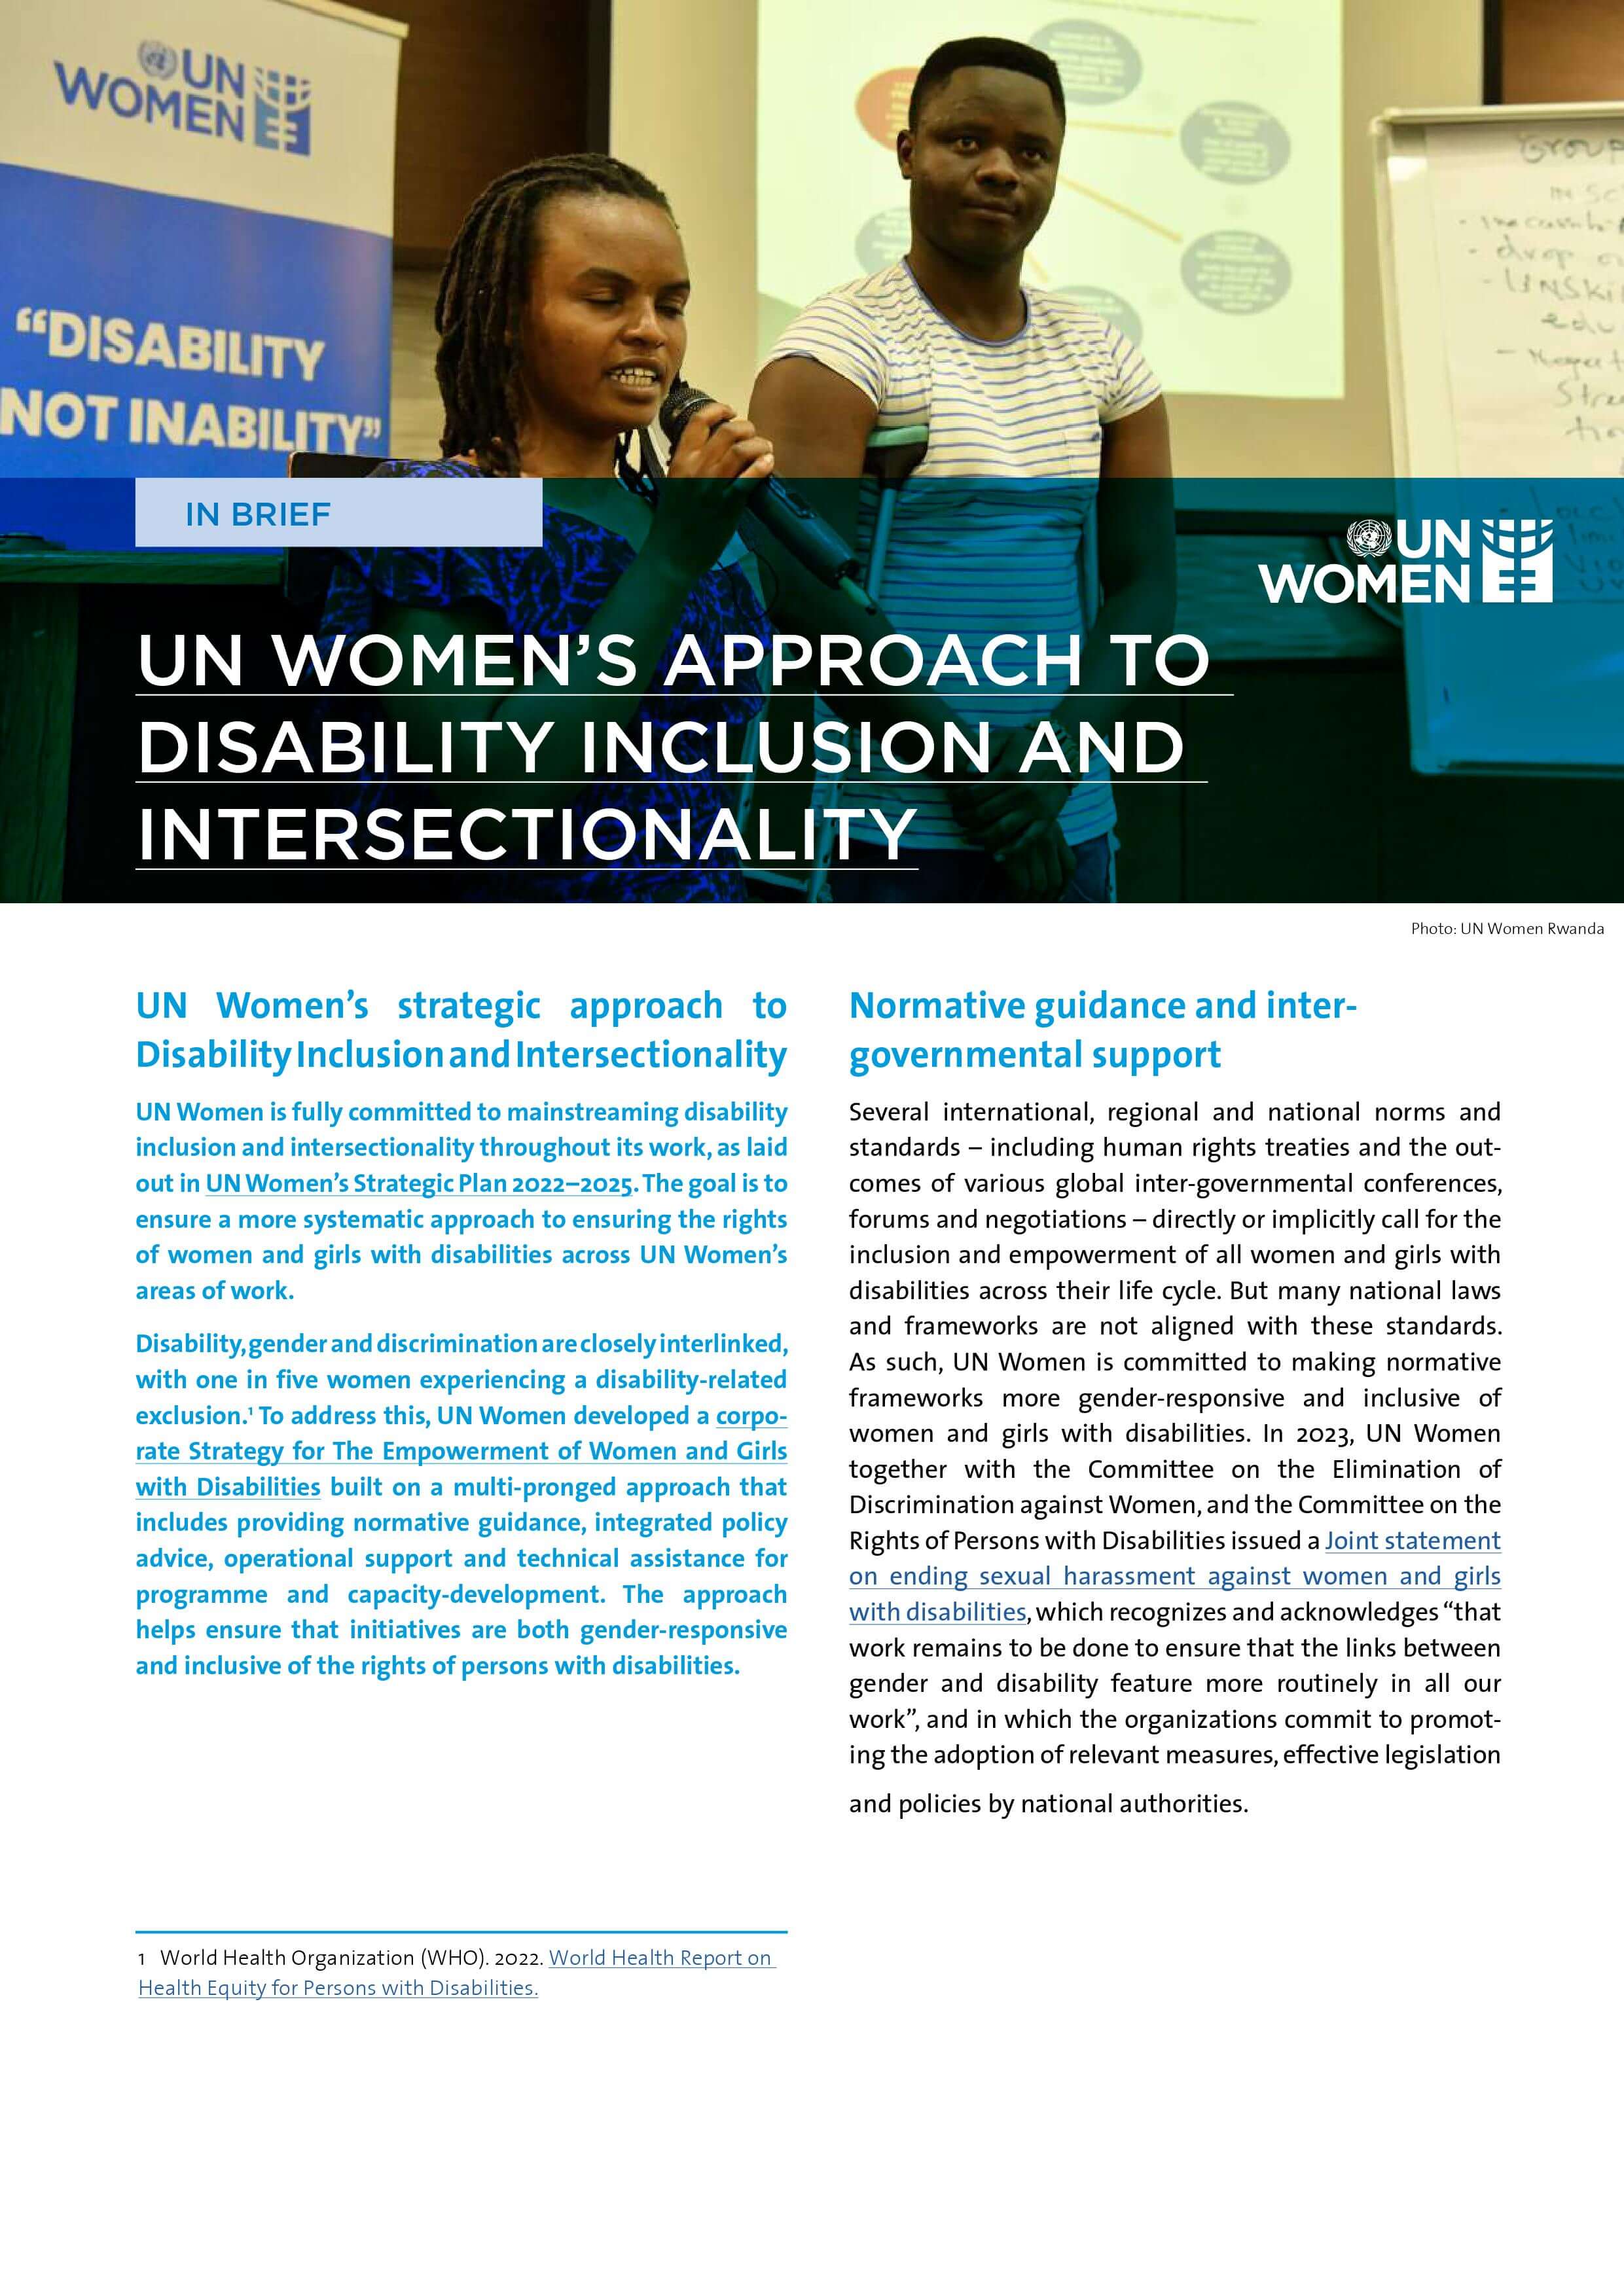 UN Women’s approach to disability inclusion and intersectionality